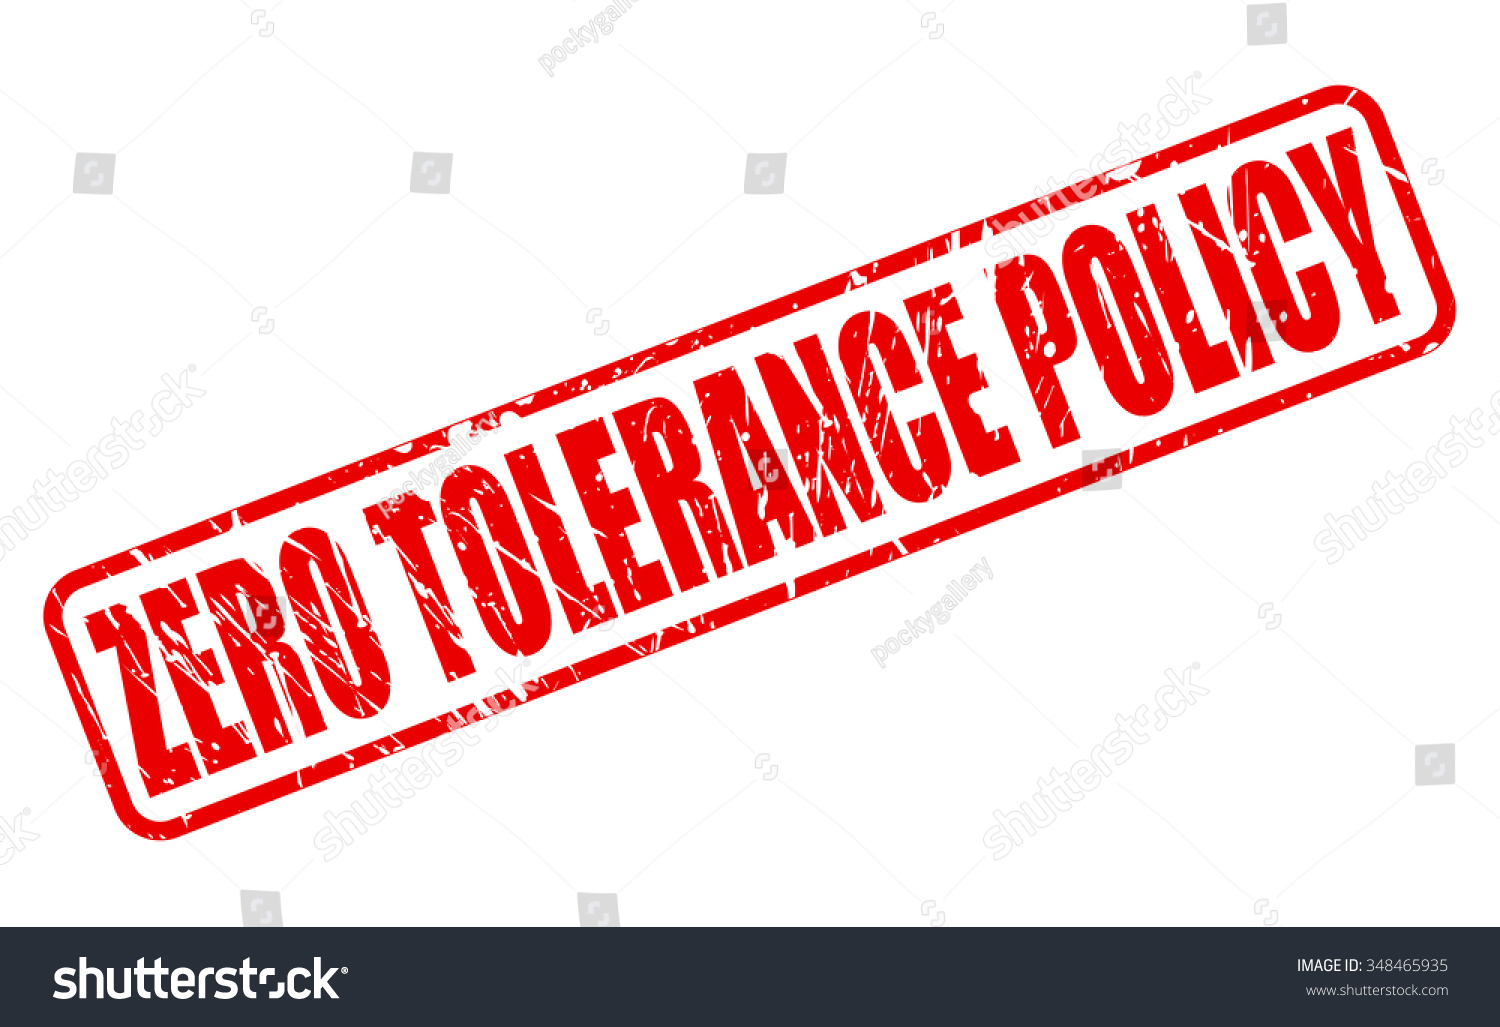 Zero Tolerance Policy Red Stamp Text Stock Vector Royalty Free 348465935 Shutterstock 5460